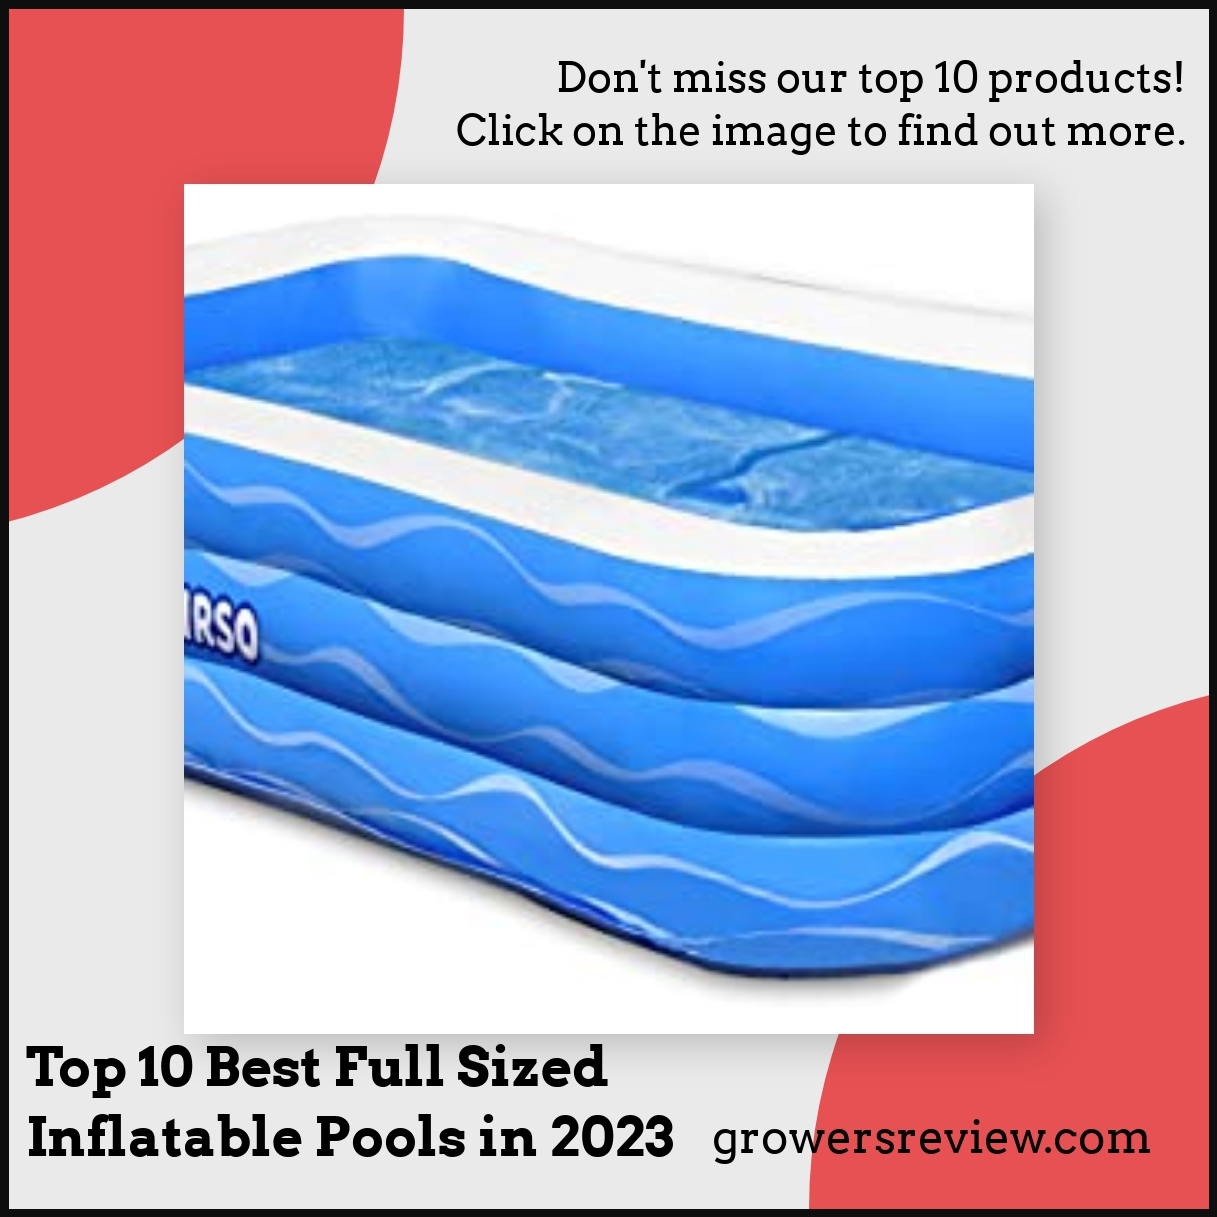 Top 10 Best Full Sized Inflatable Pools in 2023